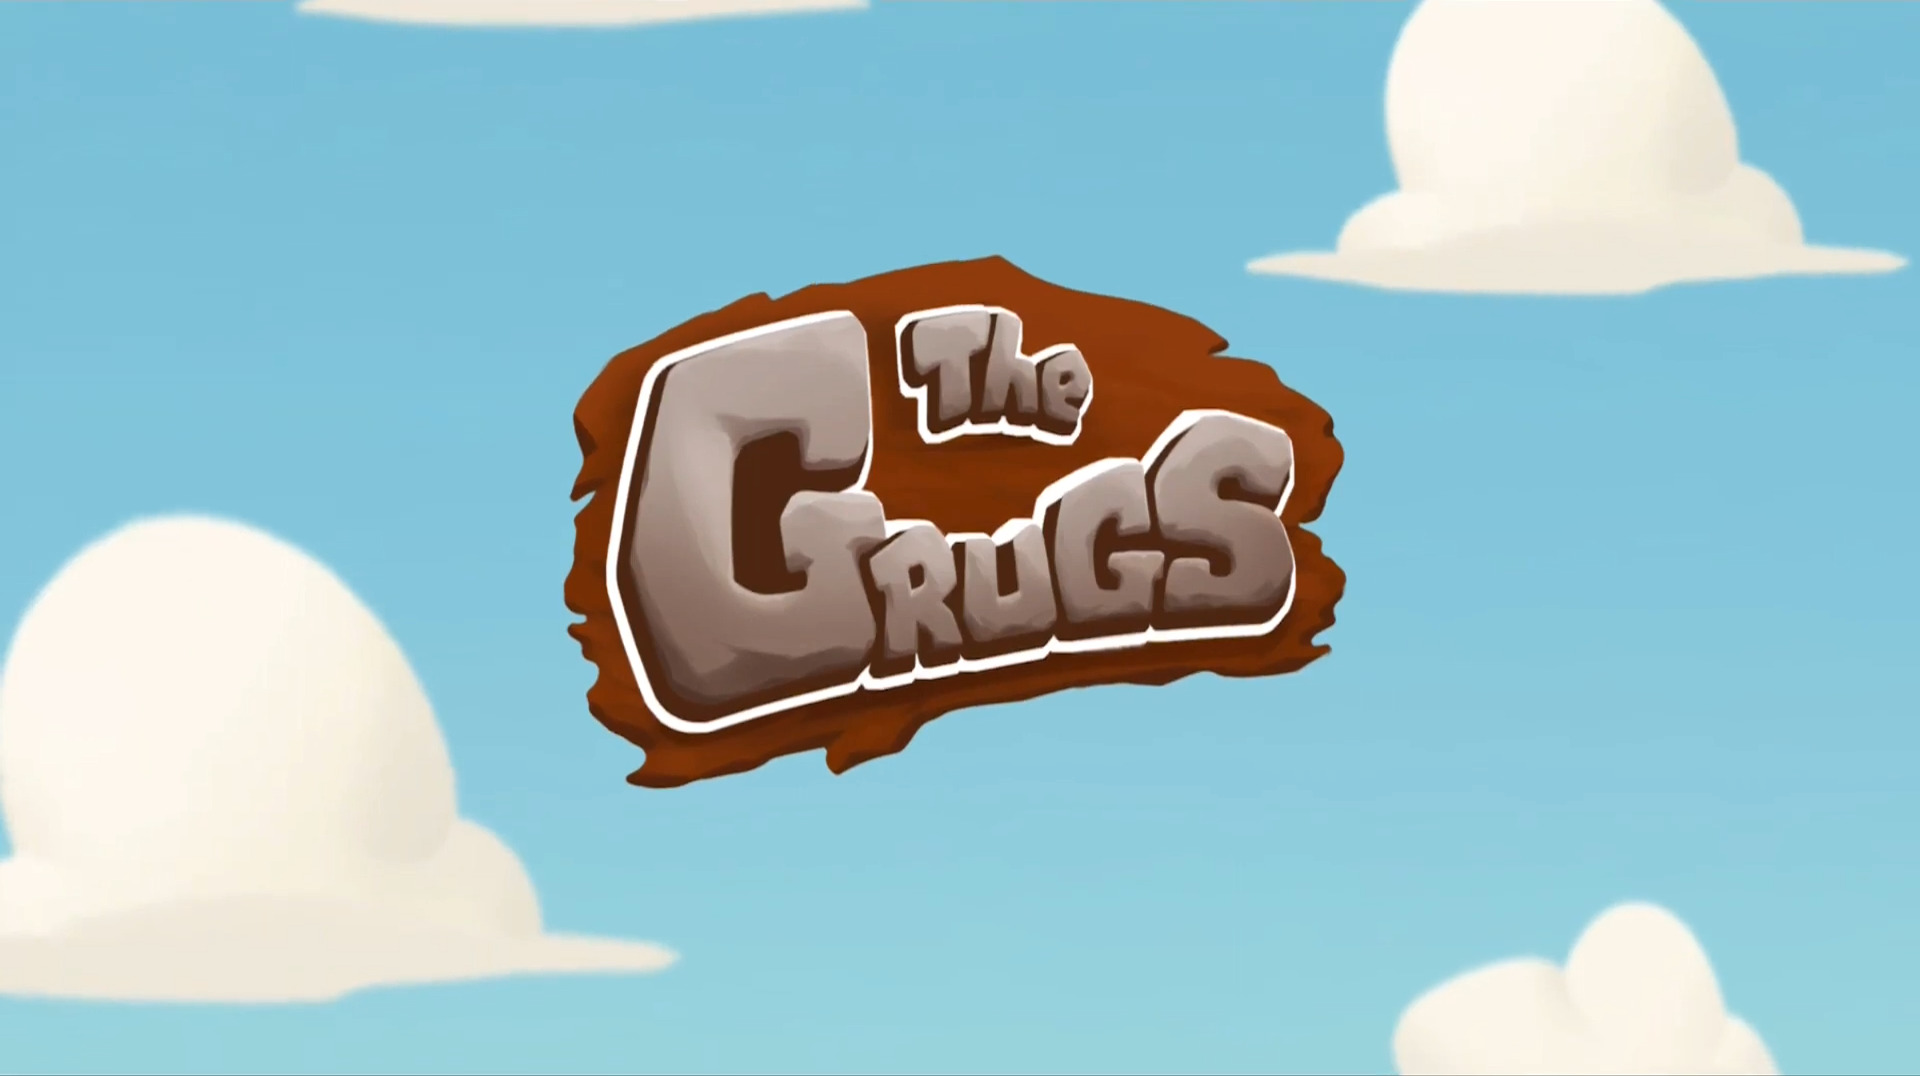 Full version of Android Runner game apk The Grugs: Hector's rest quest for tablet and phone.